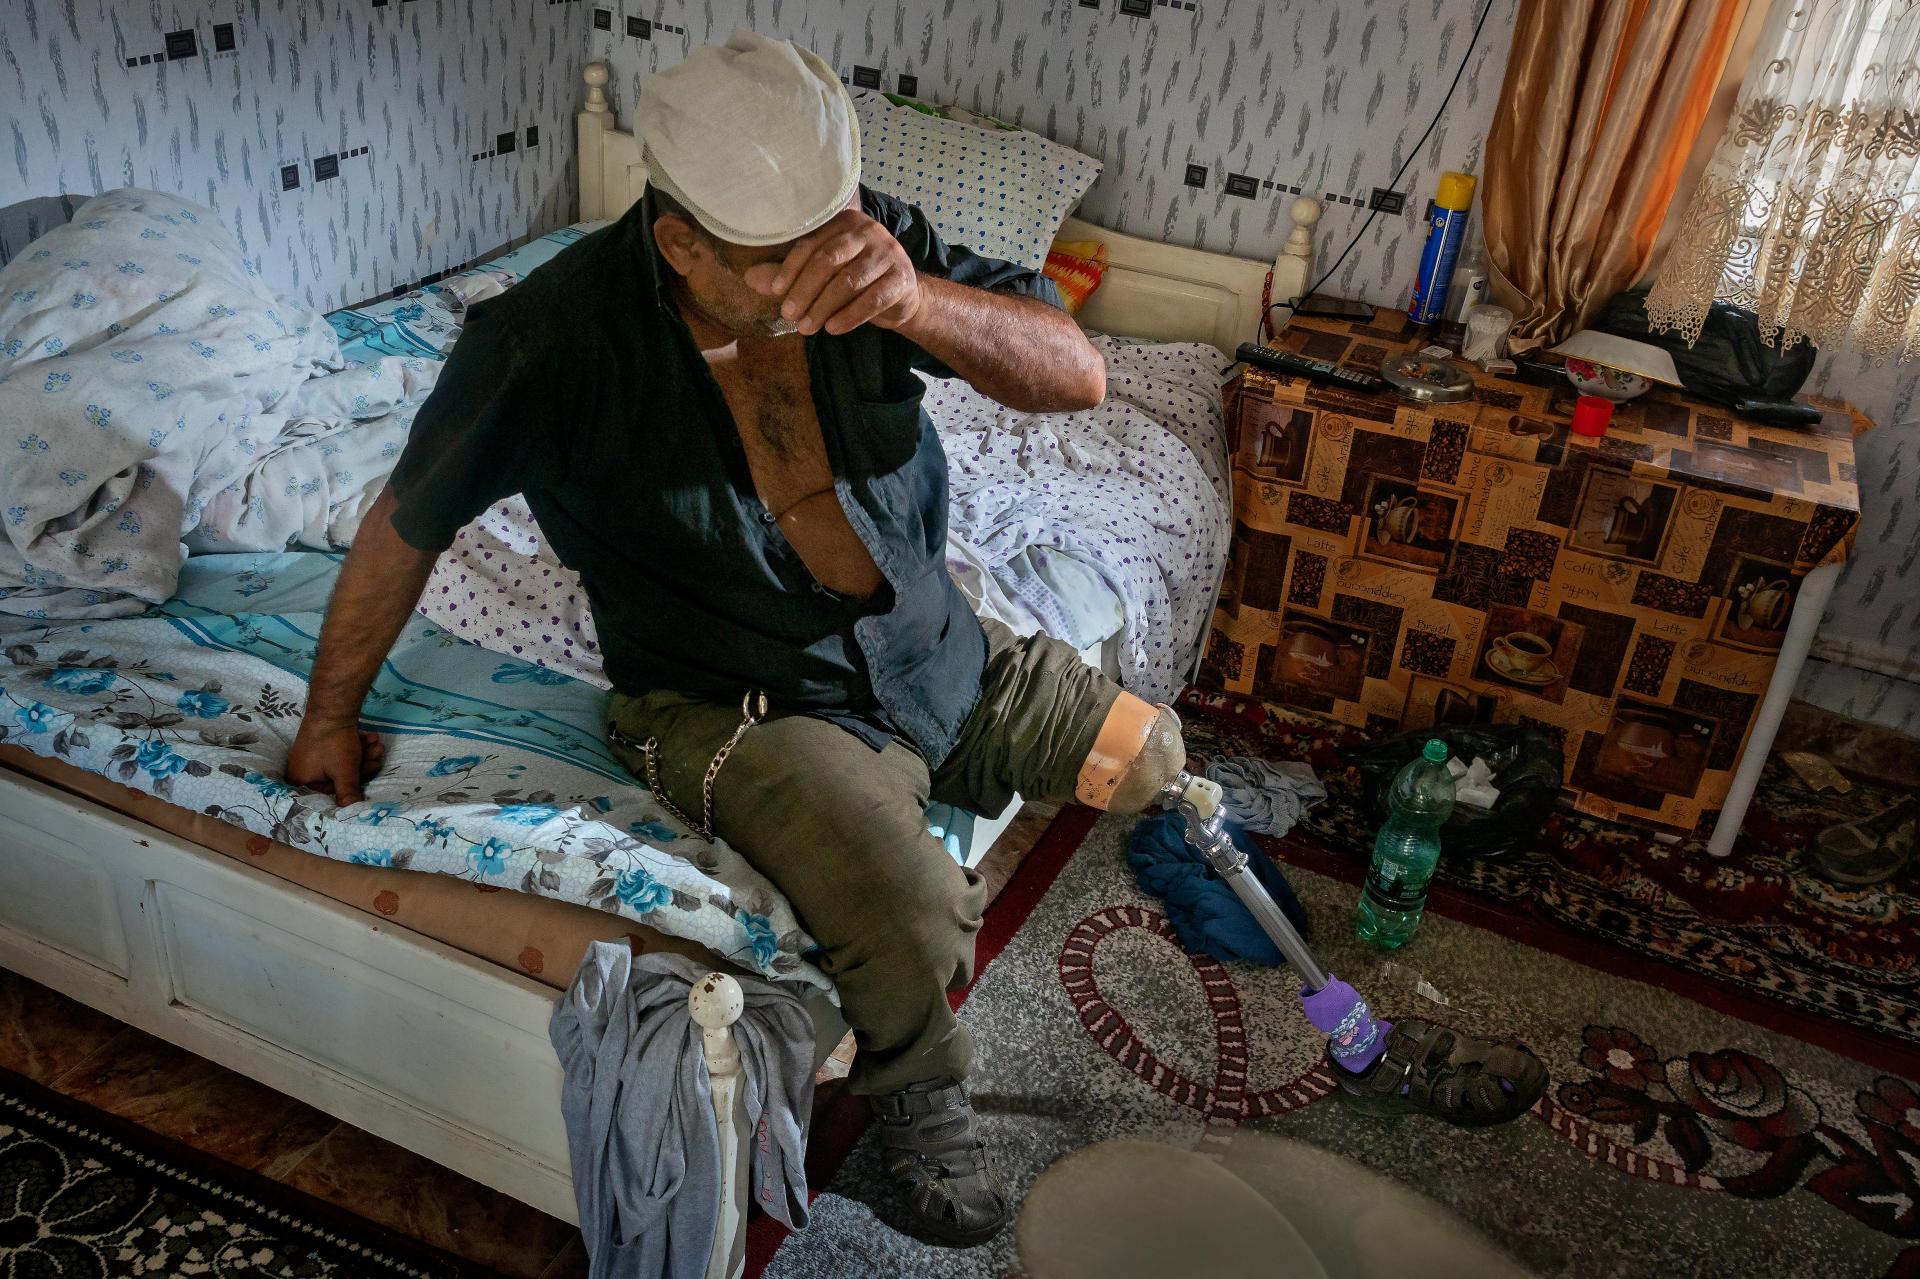 London Photography Awards Winner - ZOR - At Europe's Biggest Gypsy Ghetto